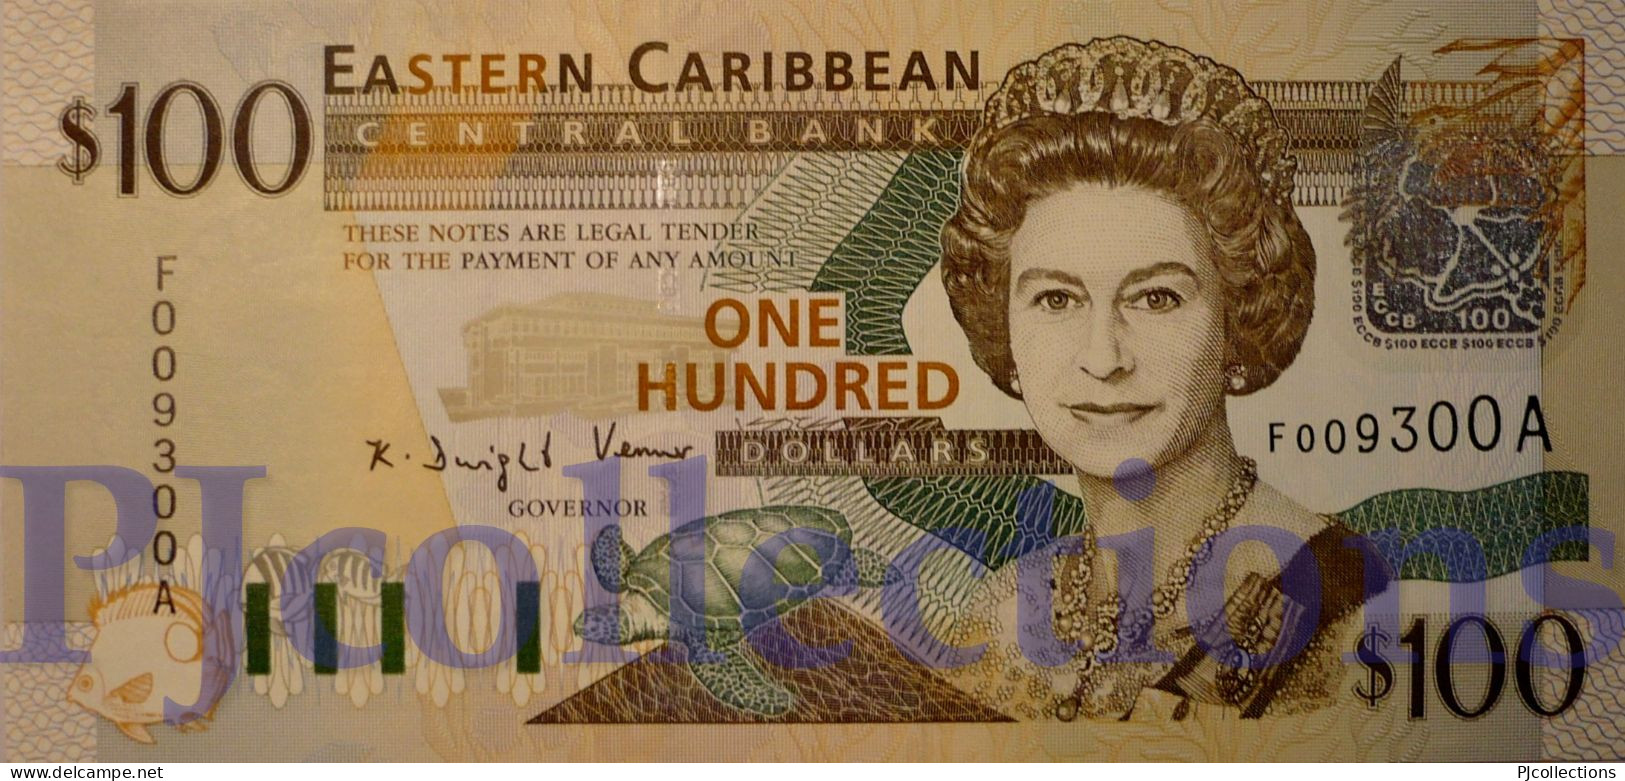 EAST CARIBBEAN 100 DOLLARS 2003 PICK 46a UNC LOW SERIAL NUMBER "F009300A" - East Carribeans